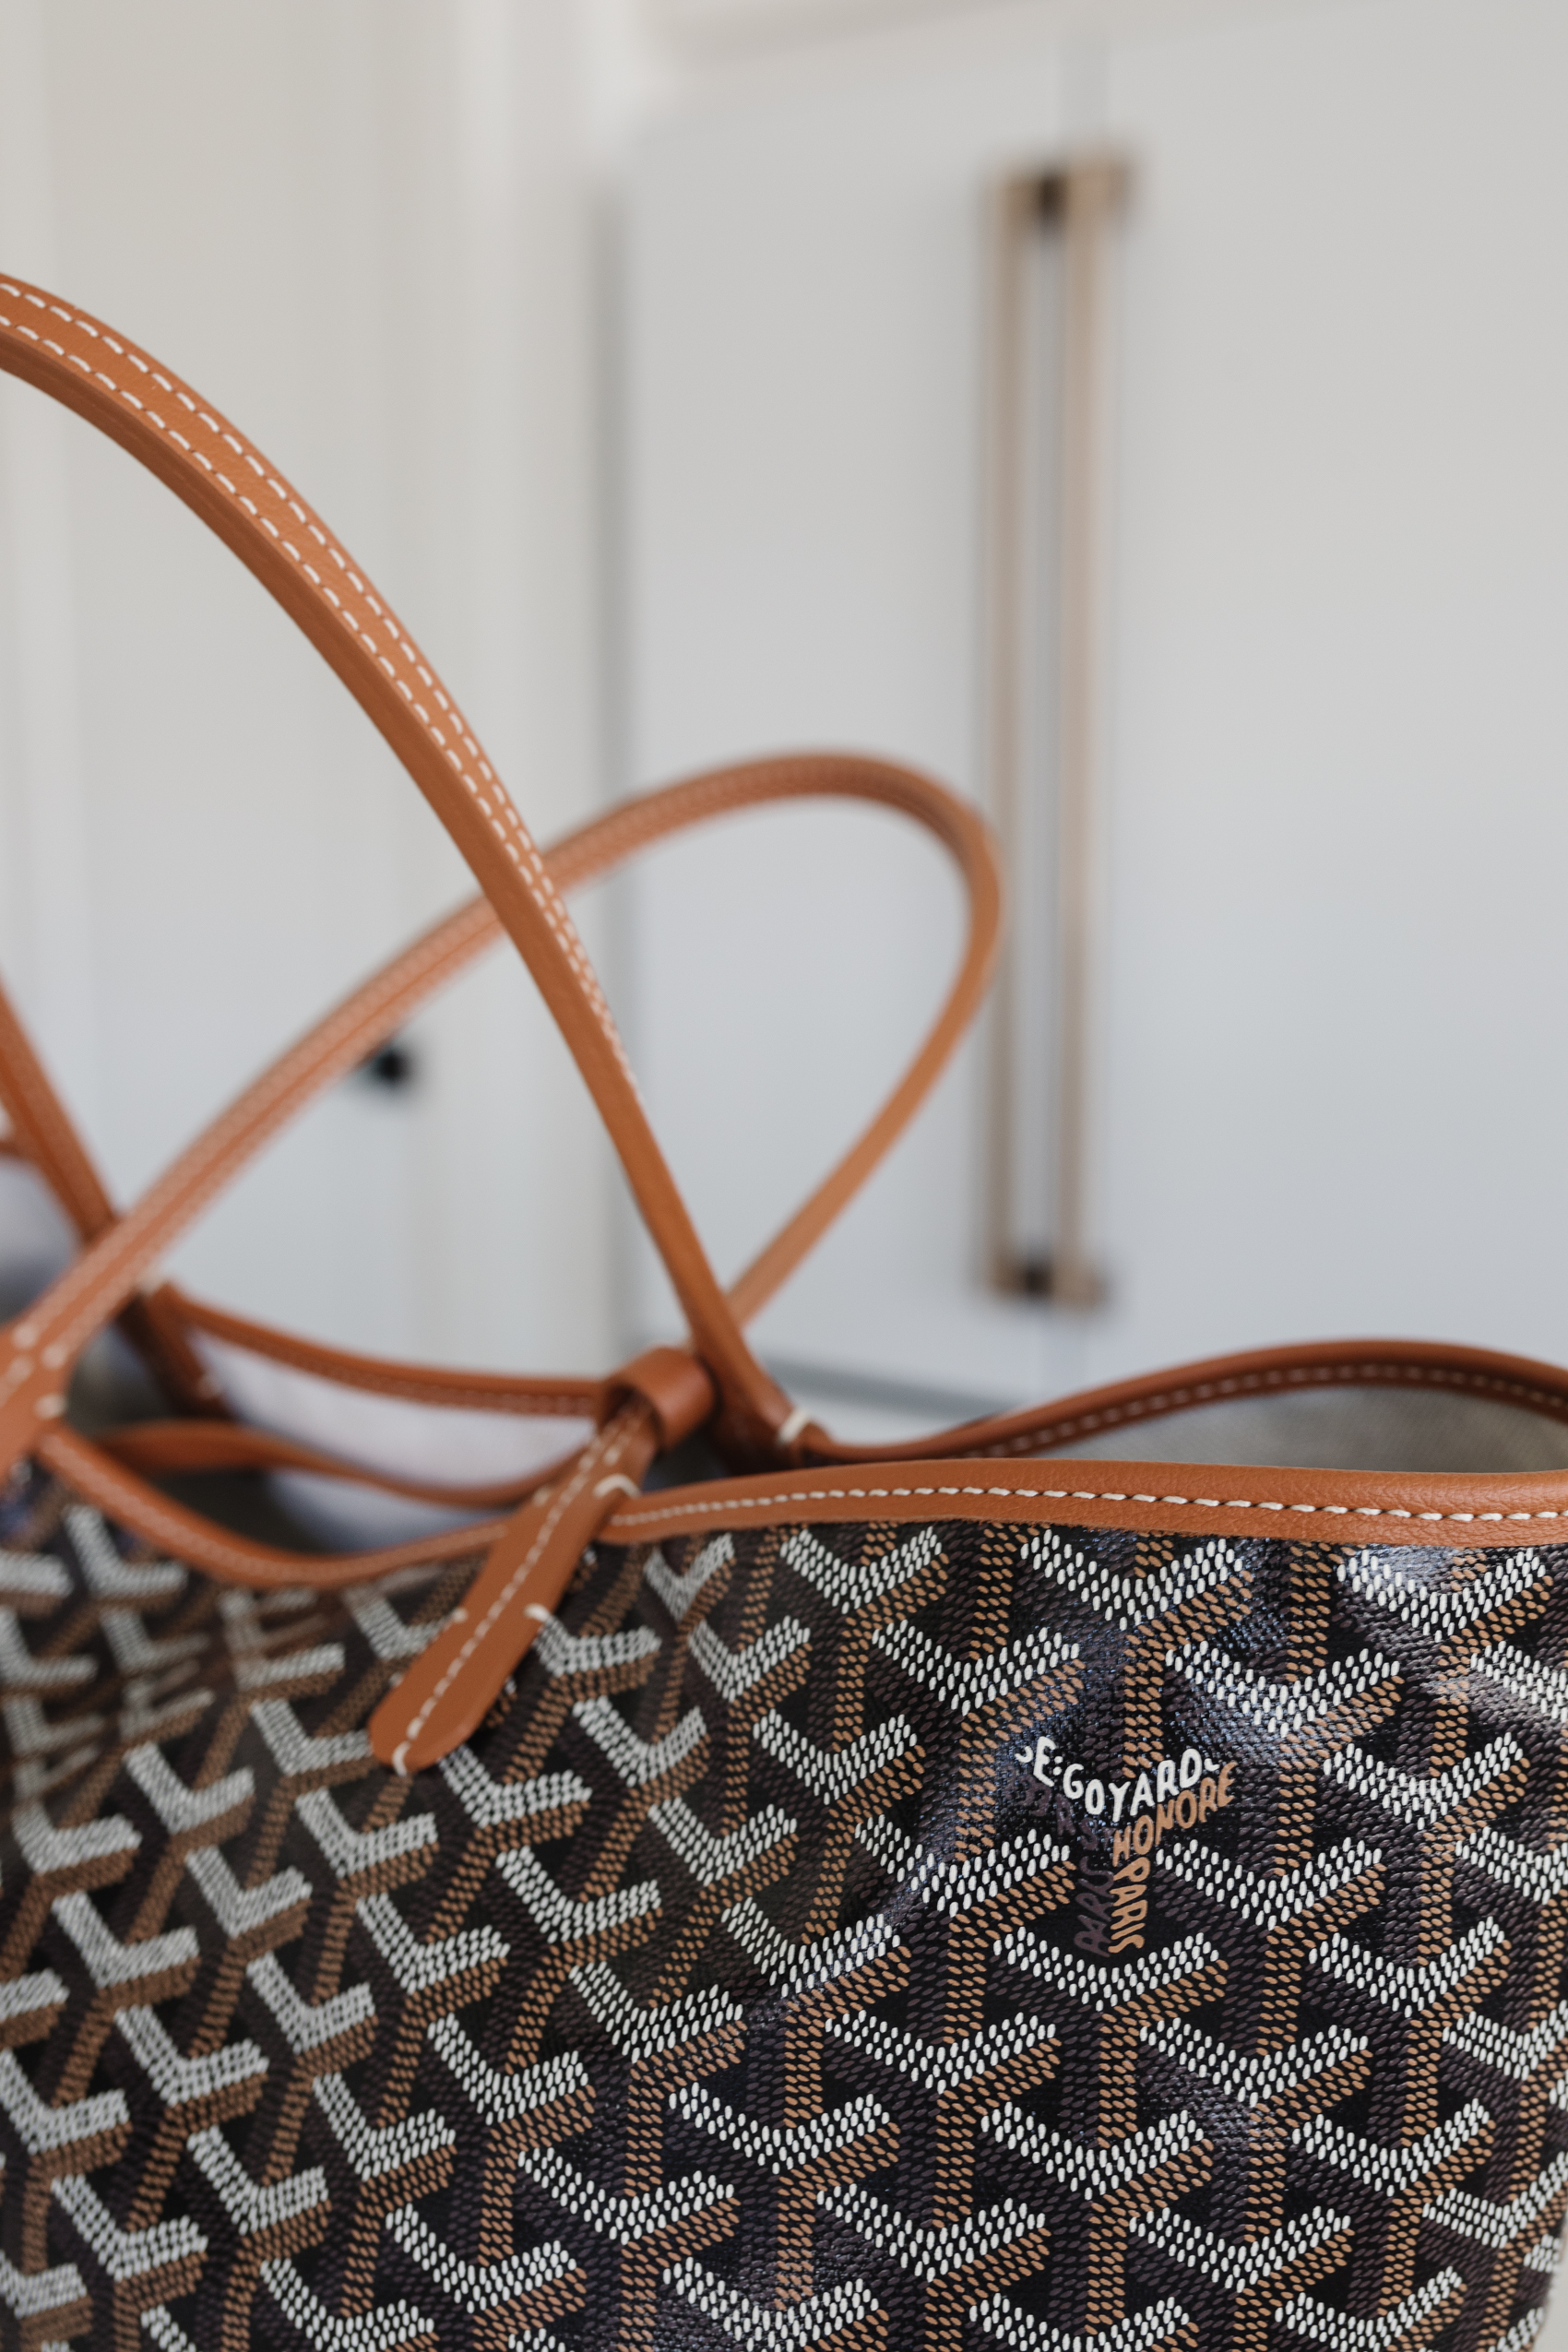 Goyard St Louis PM in black with brown leather trim